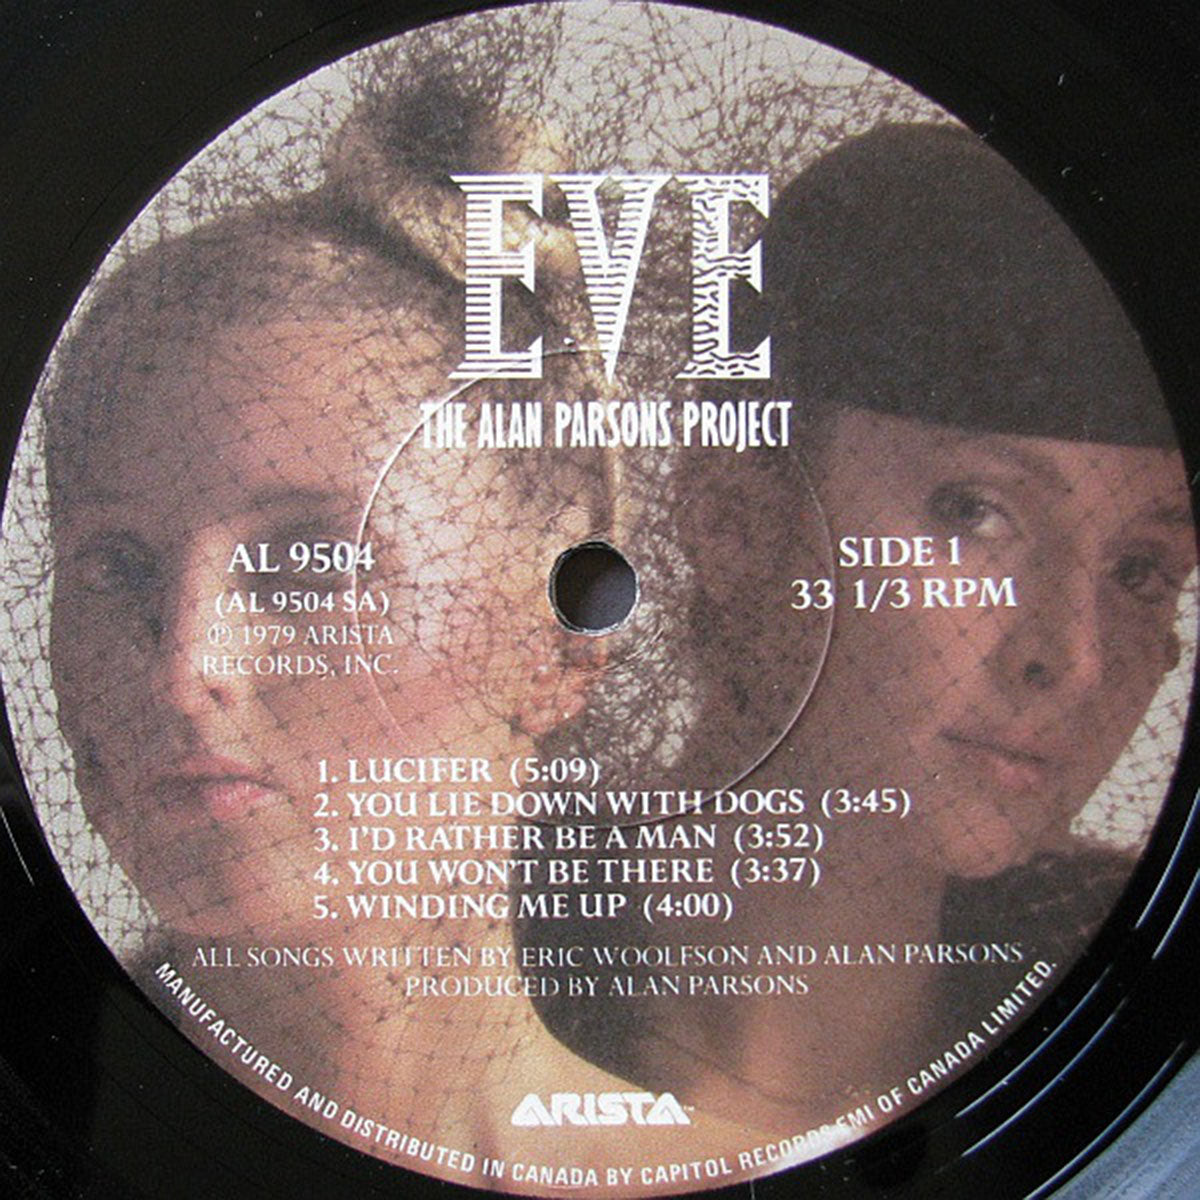 The Alan Parsons Project – Eve - 1979